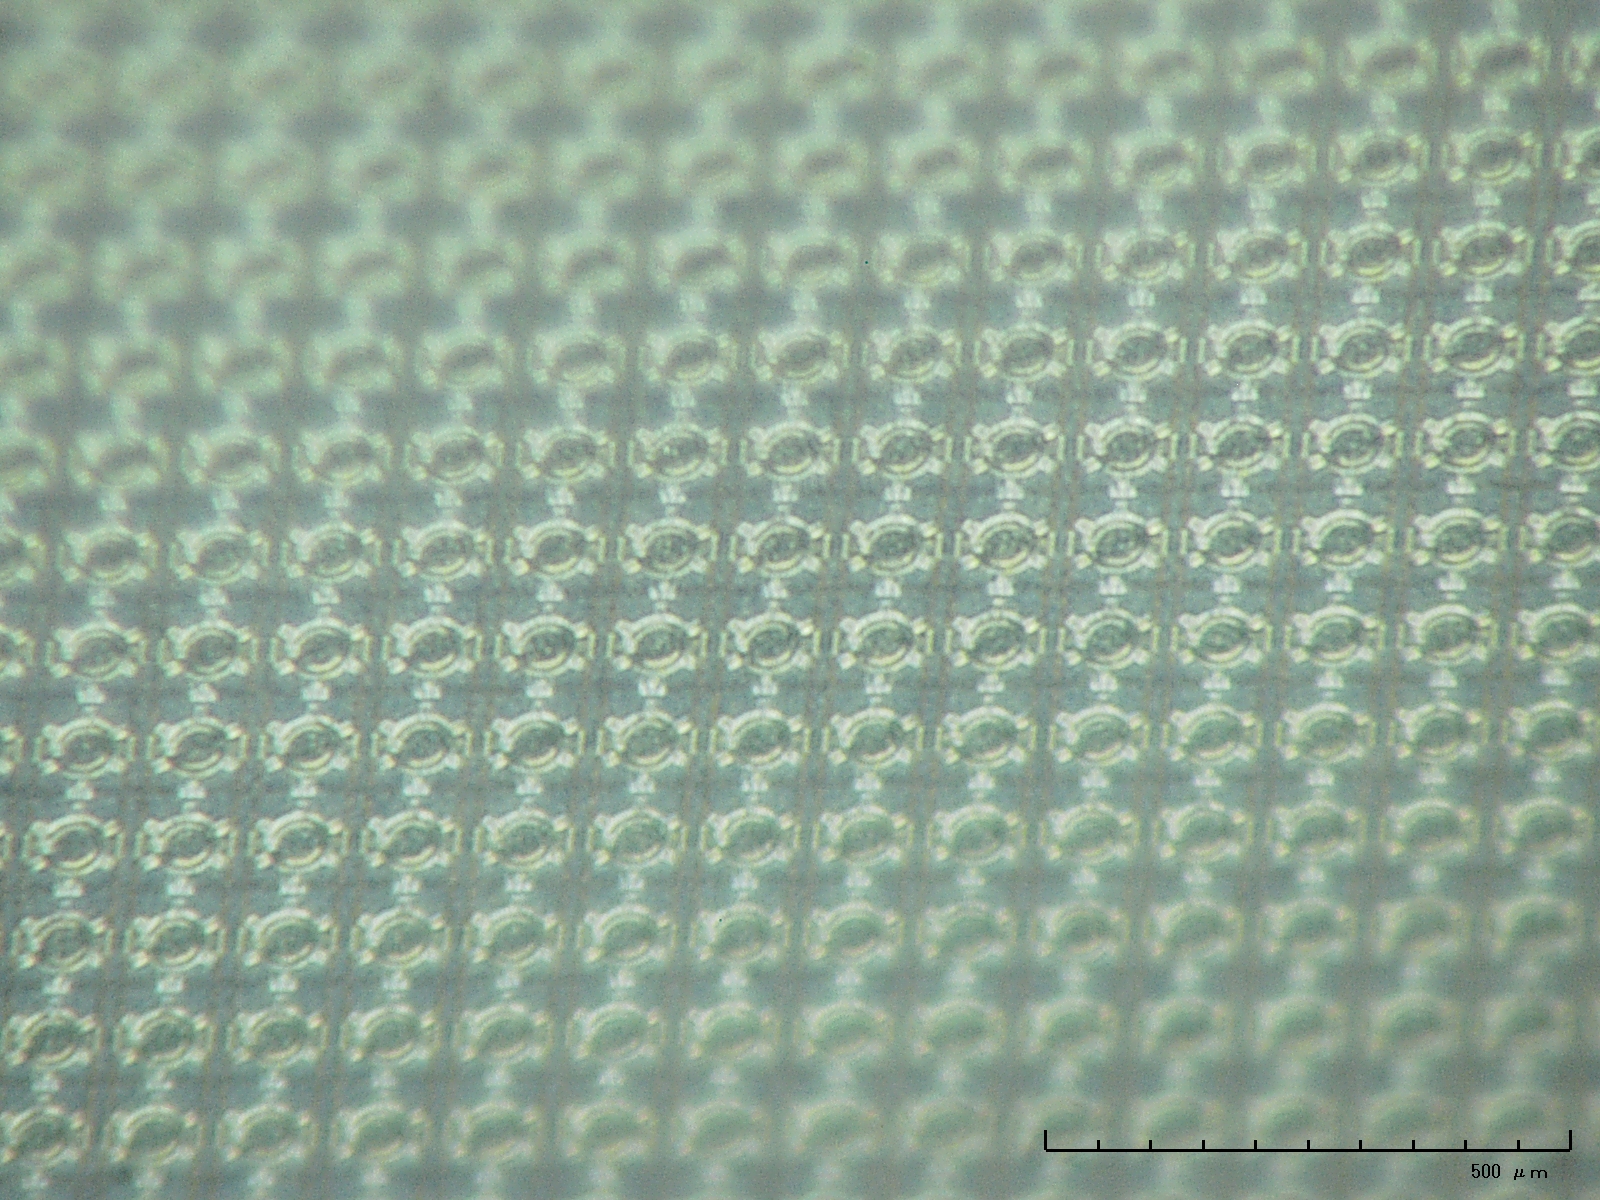 Microscopic picture of a pMUT array. 